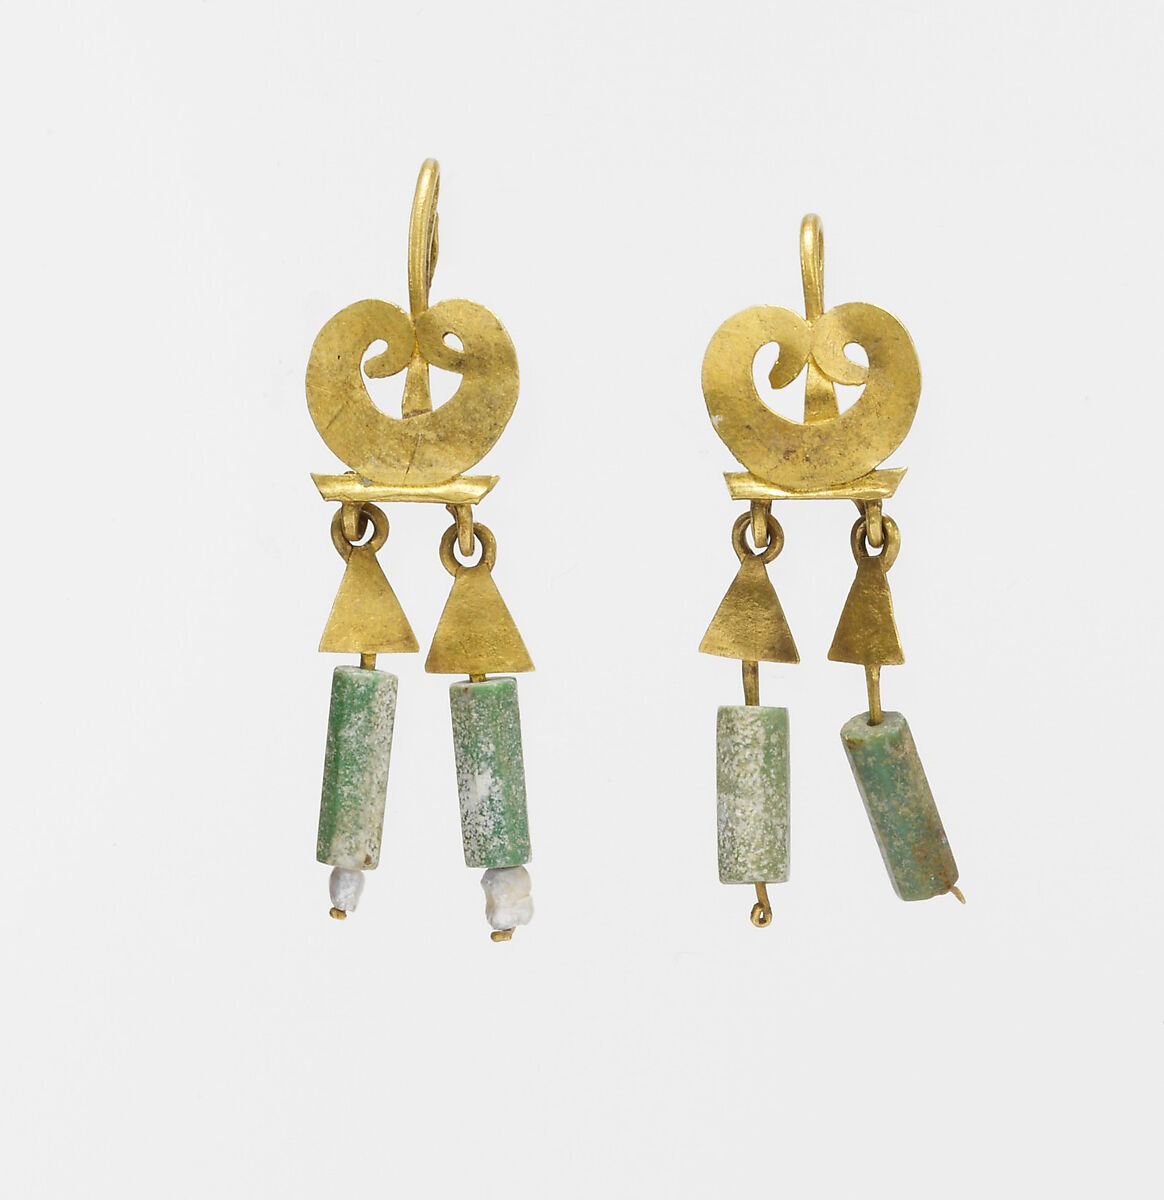 Gold and chalcedony earring, Gold, chalcedony, Roman